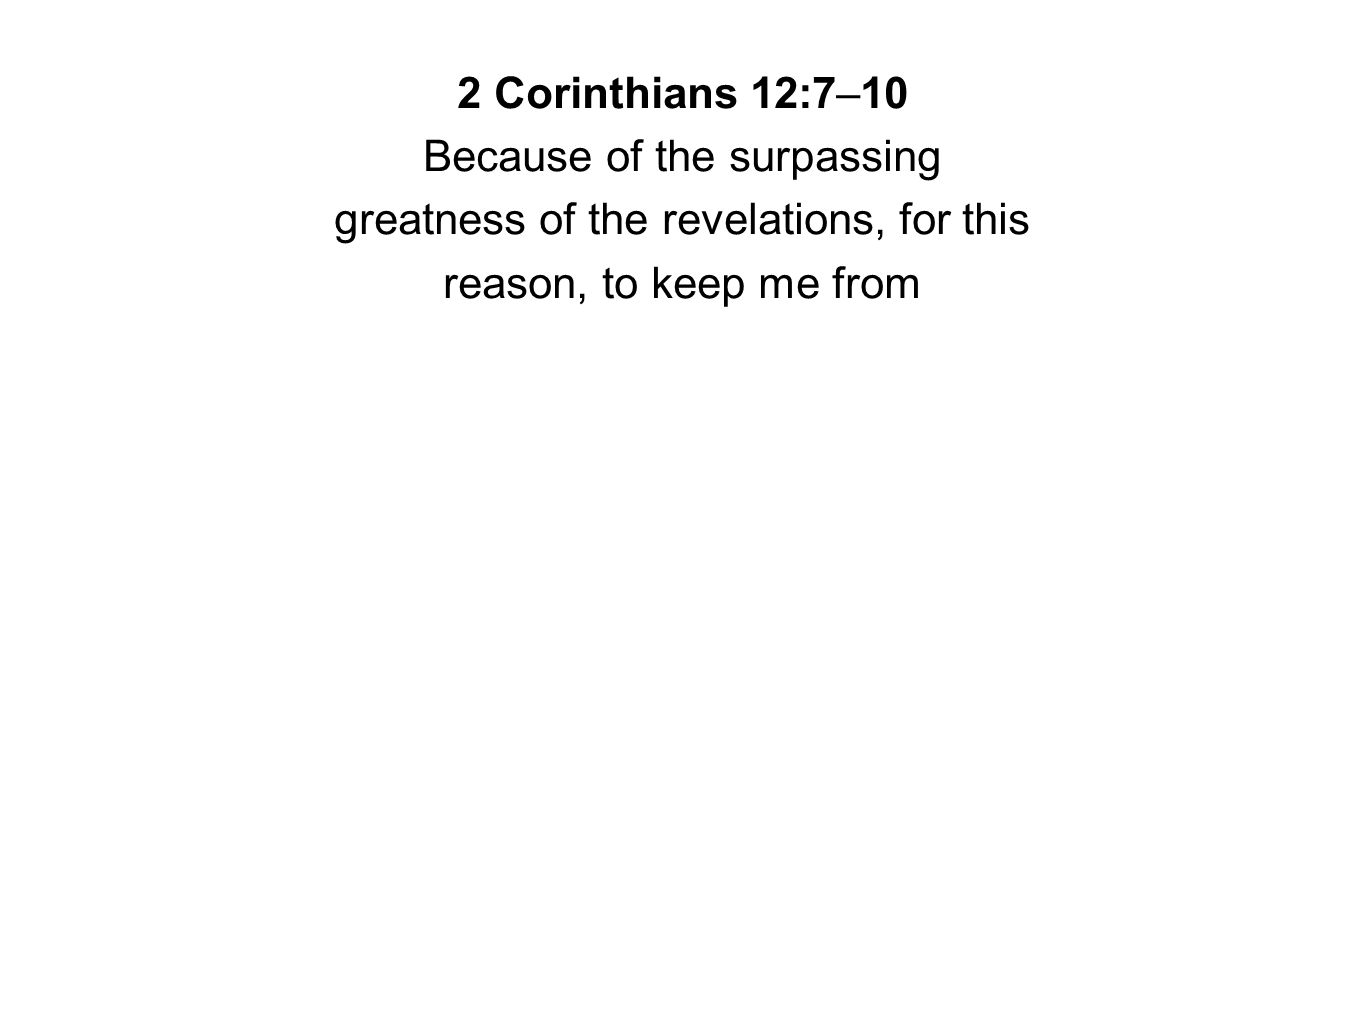 2 Corinthians 12:7–10 Because of the surpassing greatness of the revelations, for this reason, to keep me from